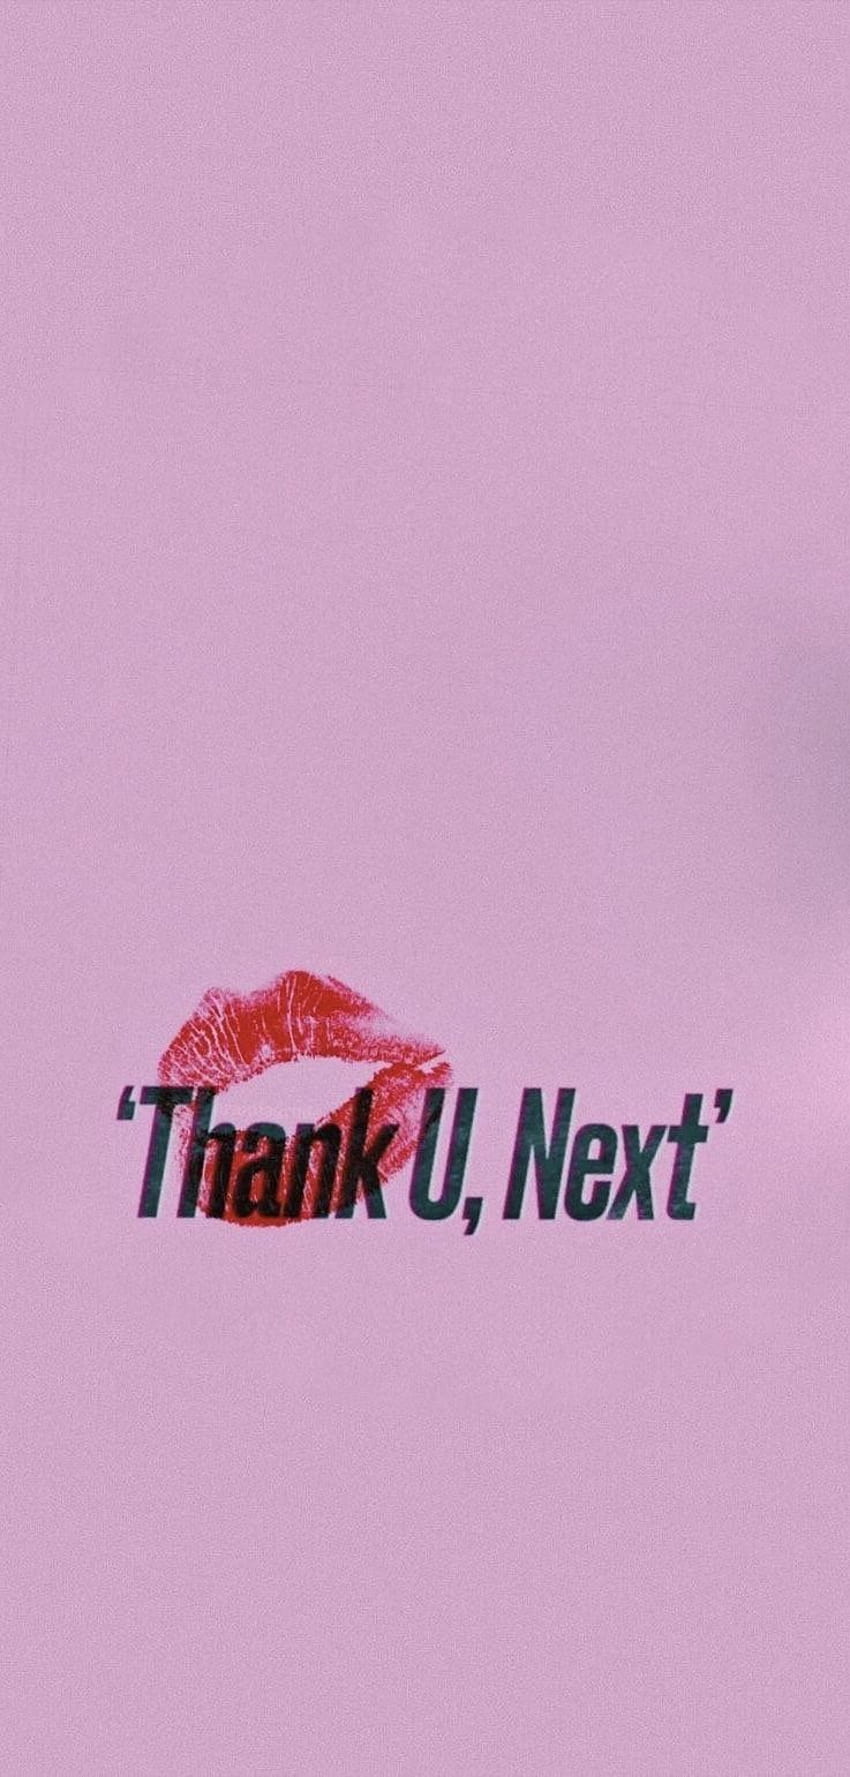 iPhone and Android : Thank You, Next for, thank u next HD phone wallpaper